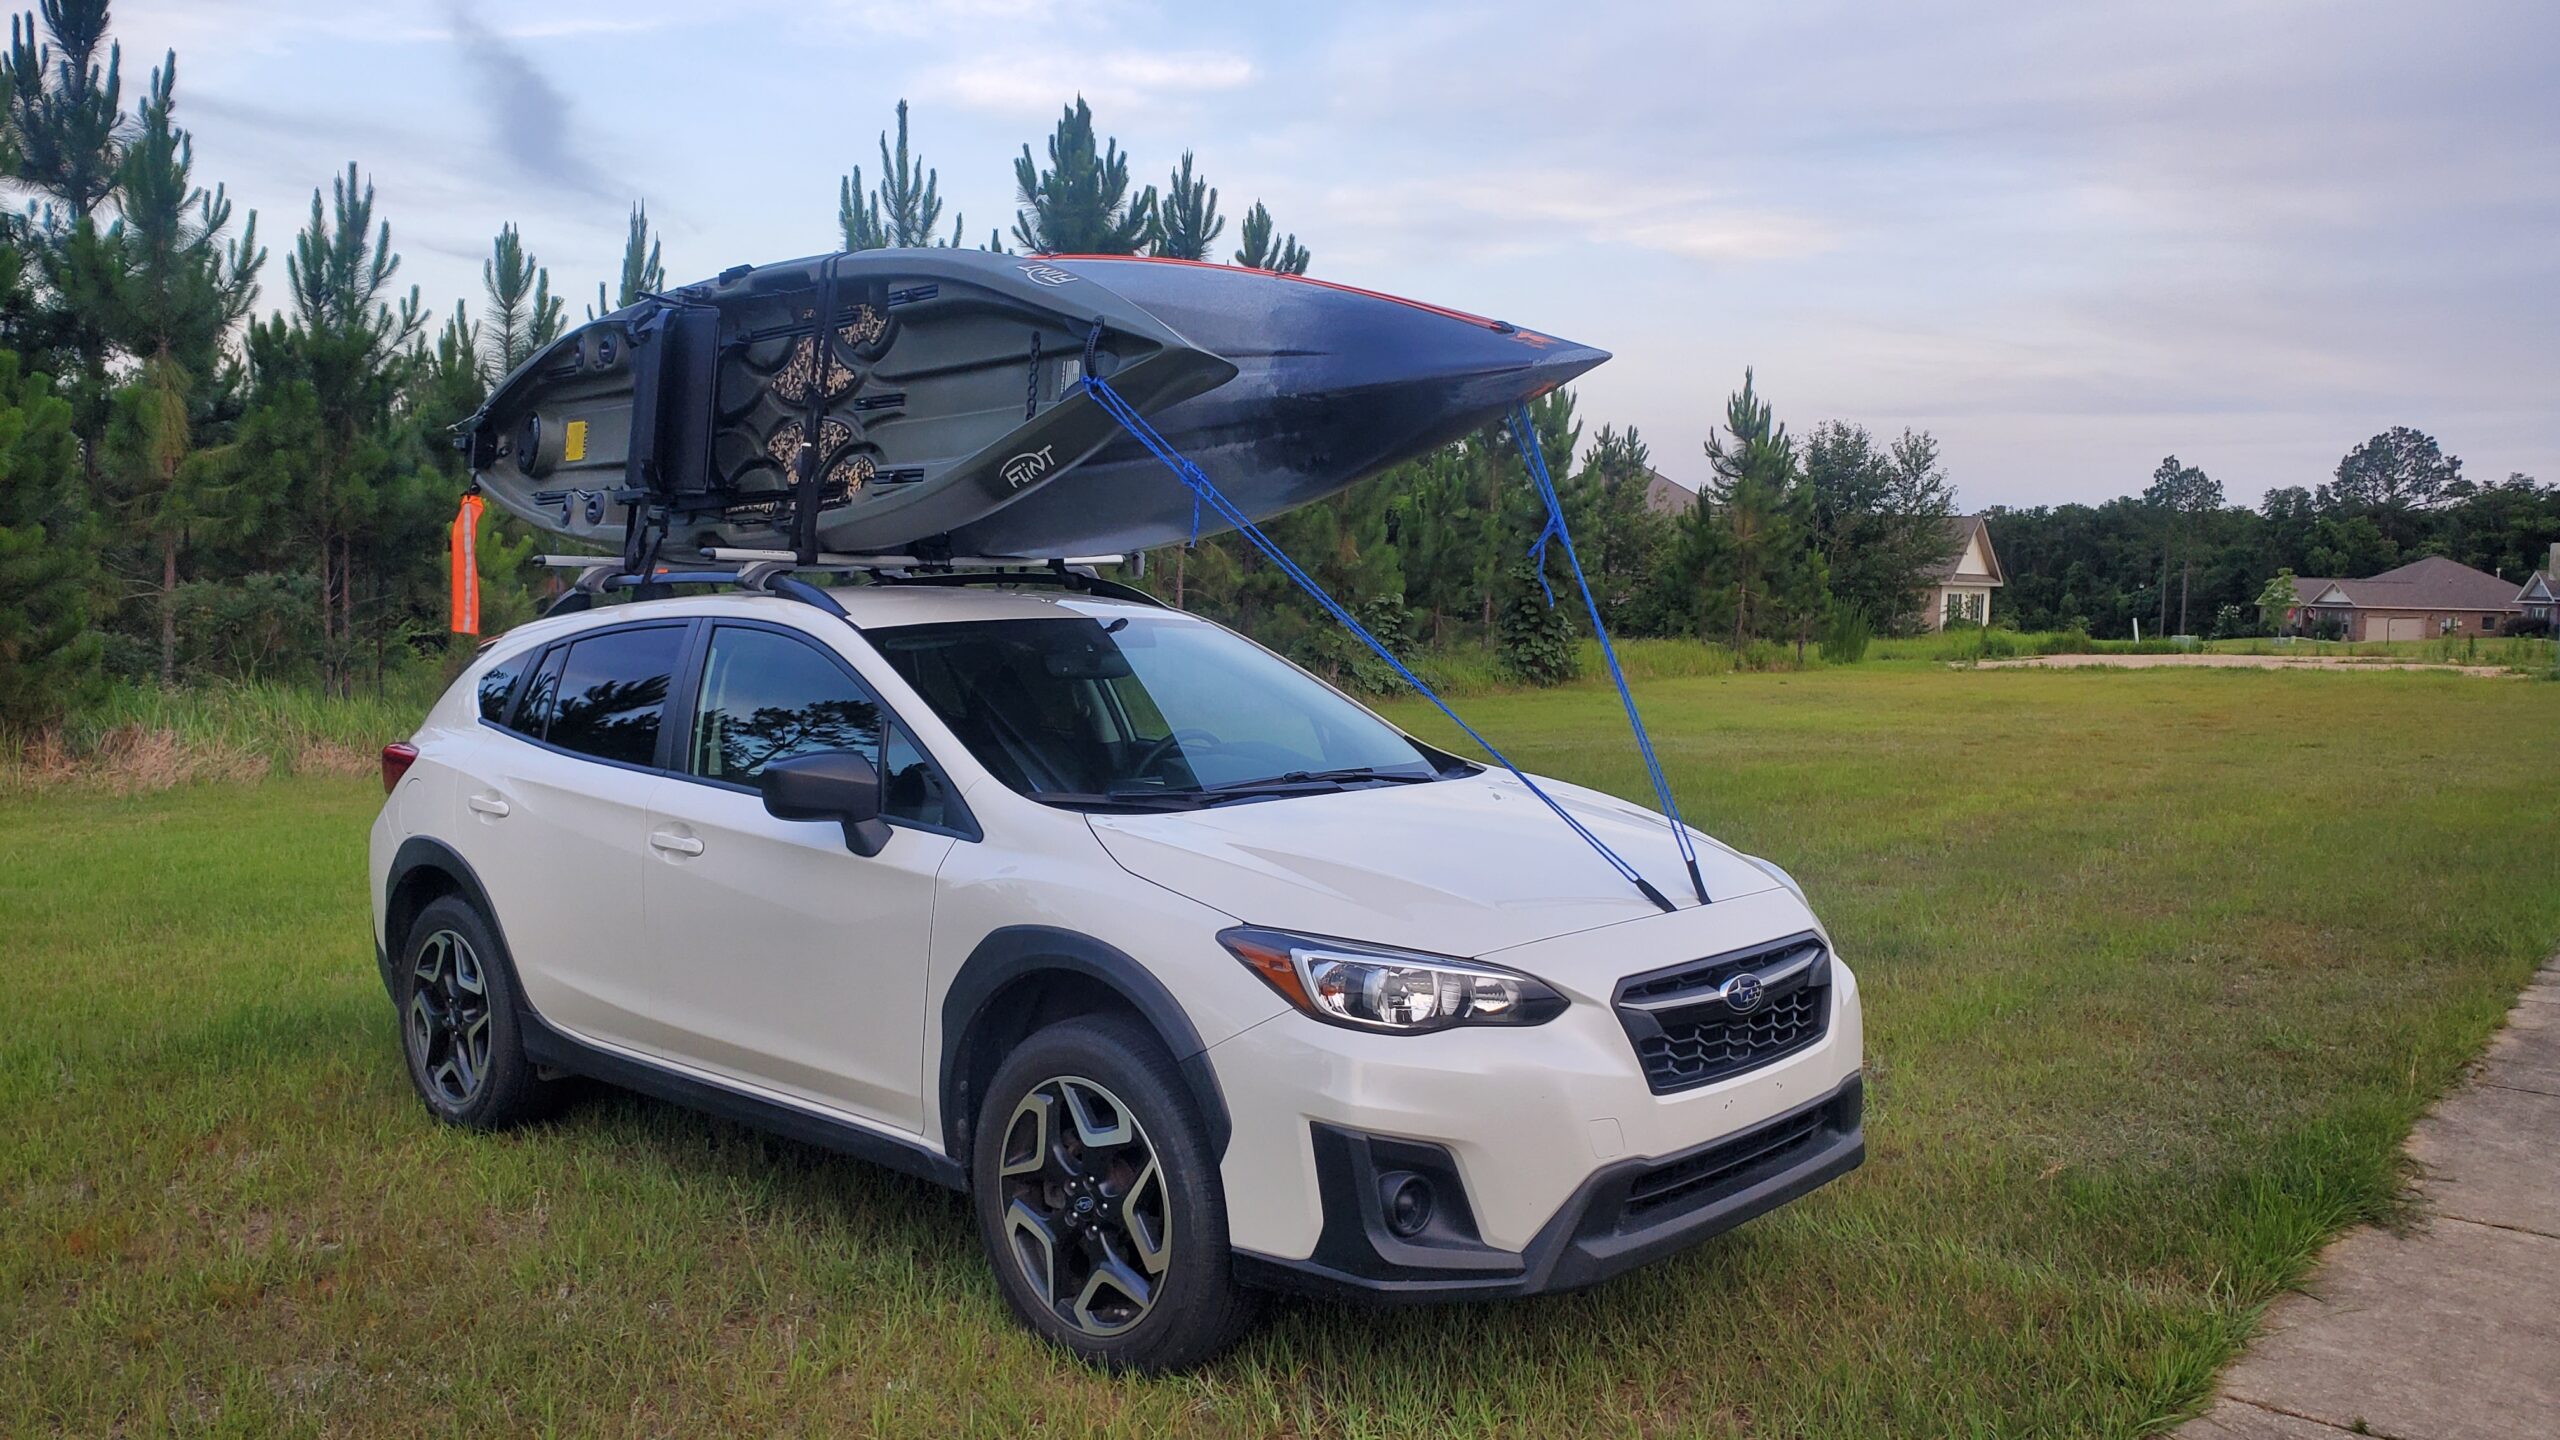 The best kayak roof racks can withstand highway speeds and carry the heaviest kayaks